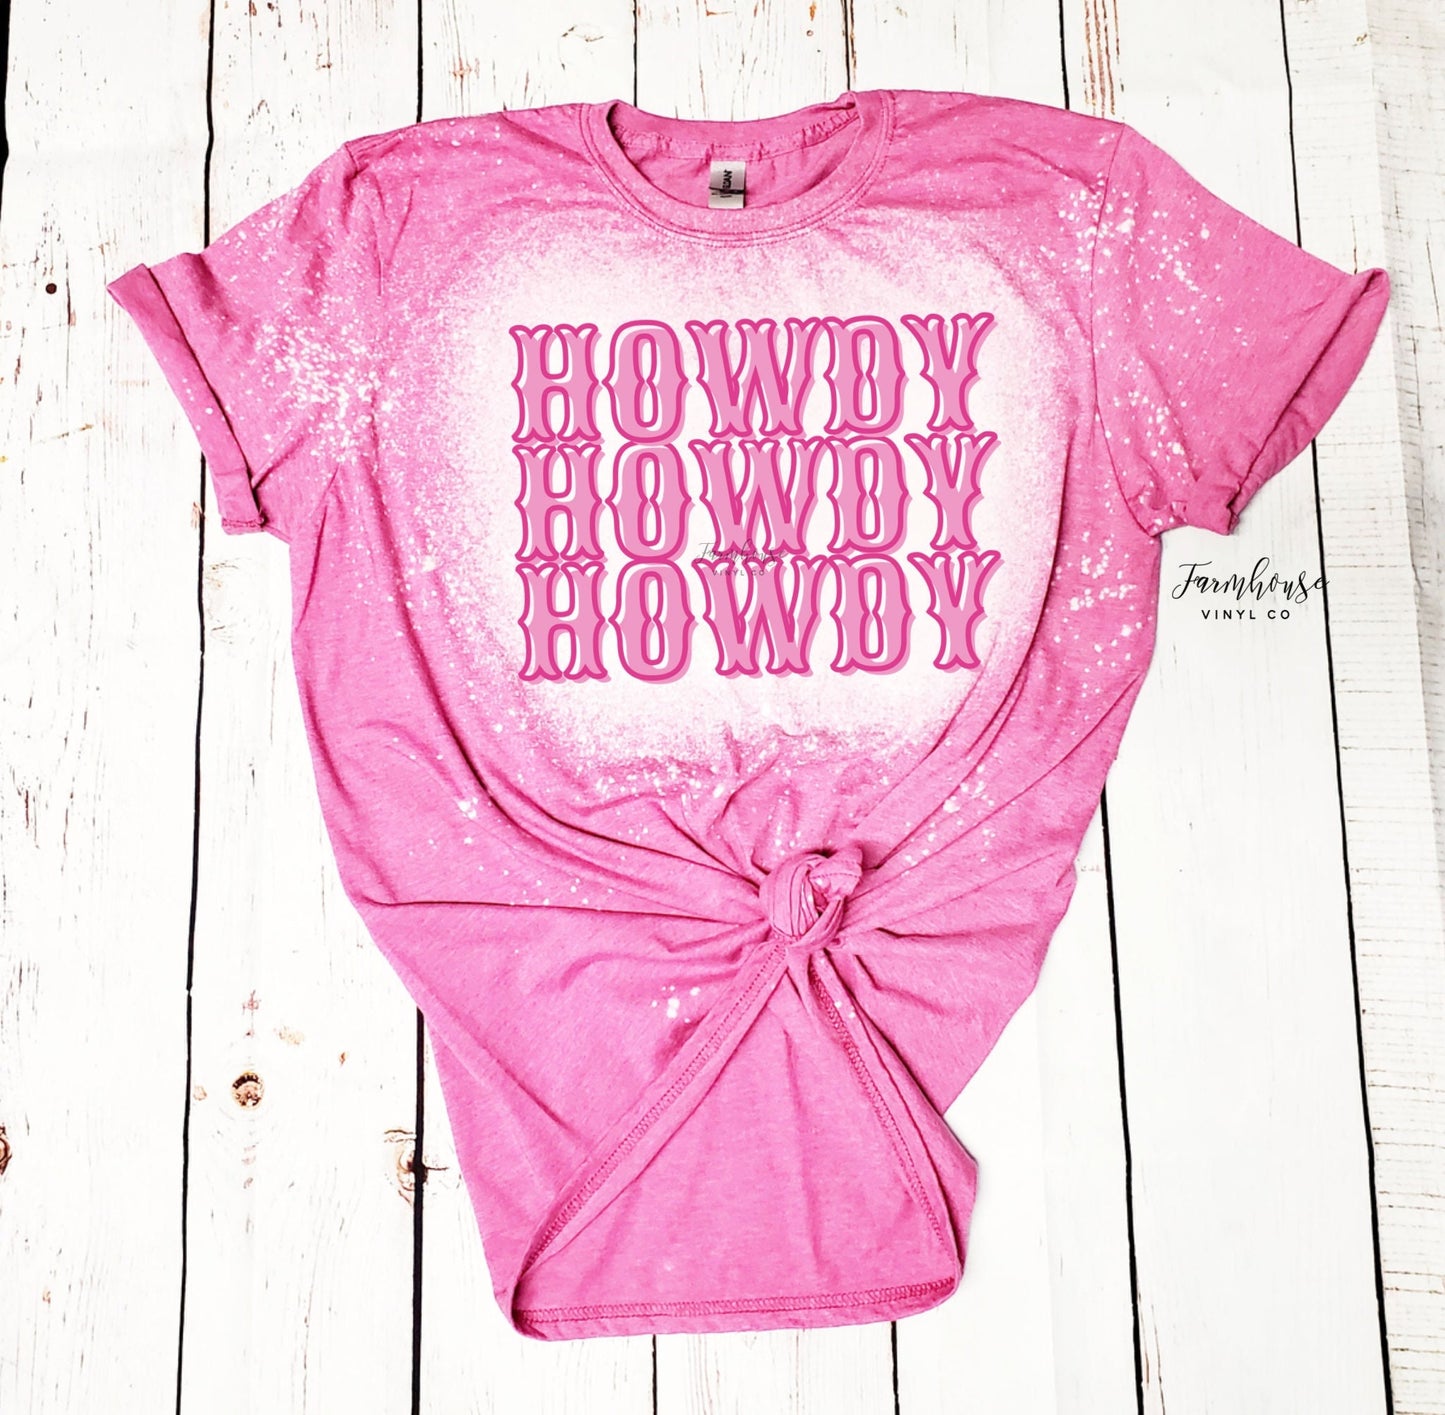 Howdy Stacked Pink Bleached Shirt / Trendy tee shirt / Southern Country Shirt / Bachelorette Party / Bridal Party Shirts / Nashville Dallas - Farmhouse Vinyl Co